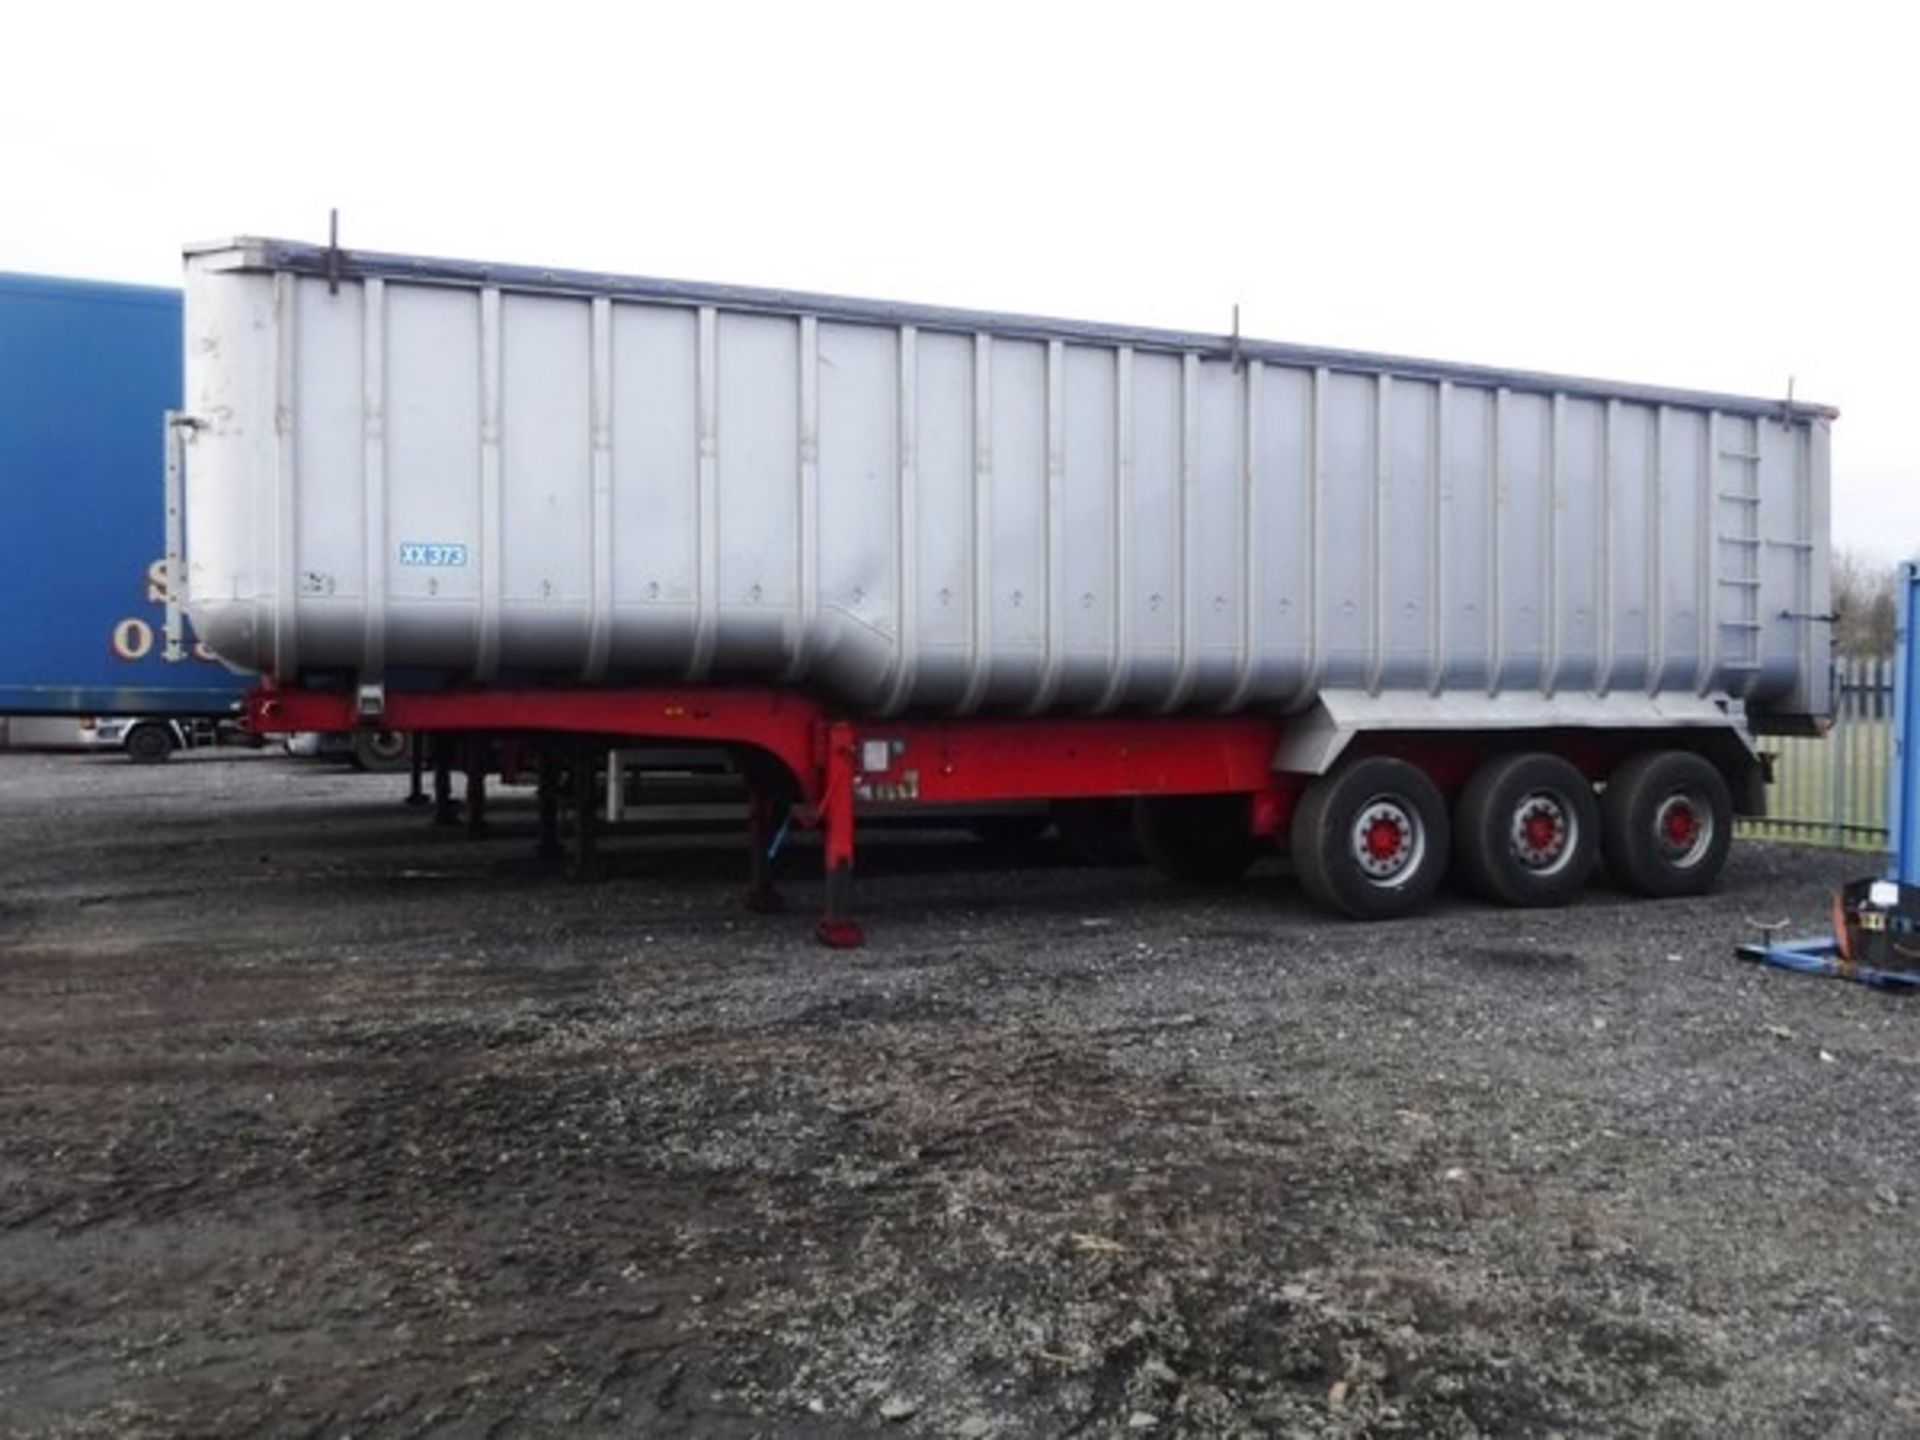 2002 GENERAL TRAILERS, 3 SAF AXLES TIPPING TRAILER, CRANEFREHAUF BODY, GVW (TONNES) 37500, PM WEIGHE - Image 2 of 5